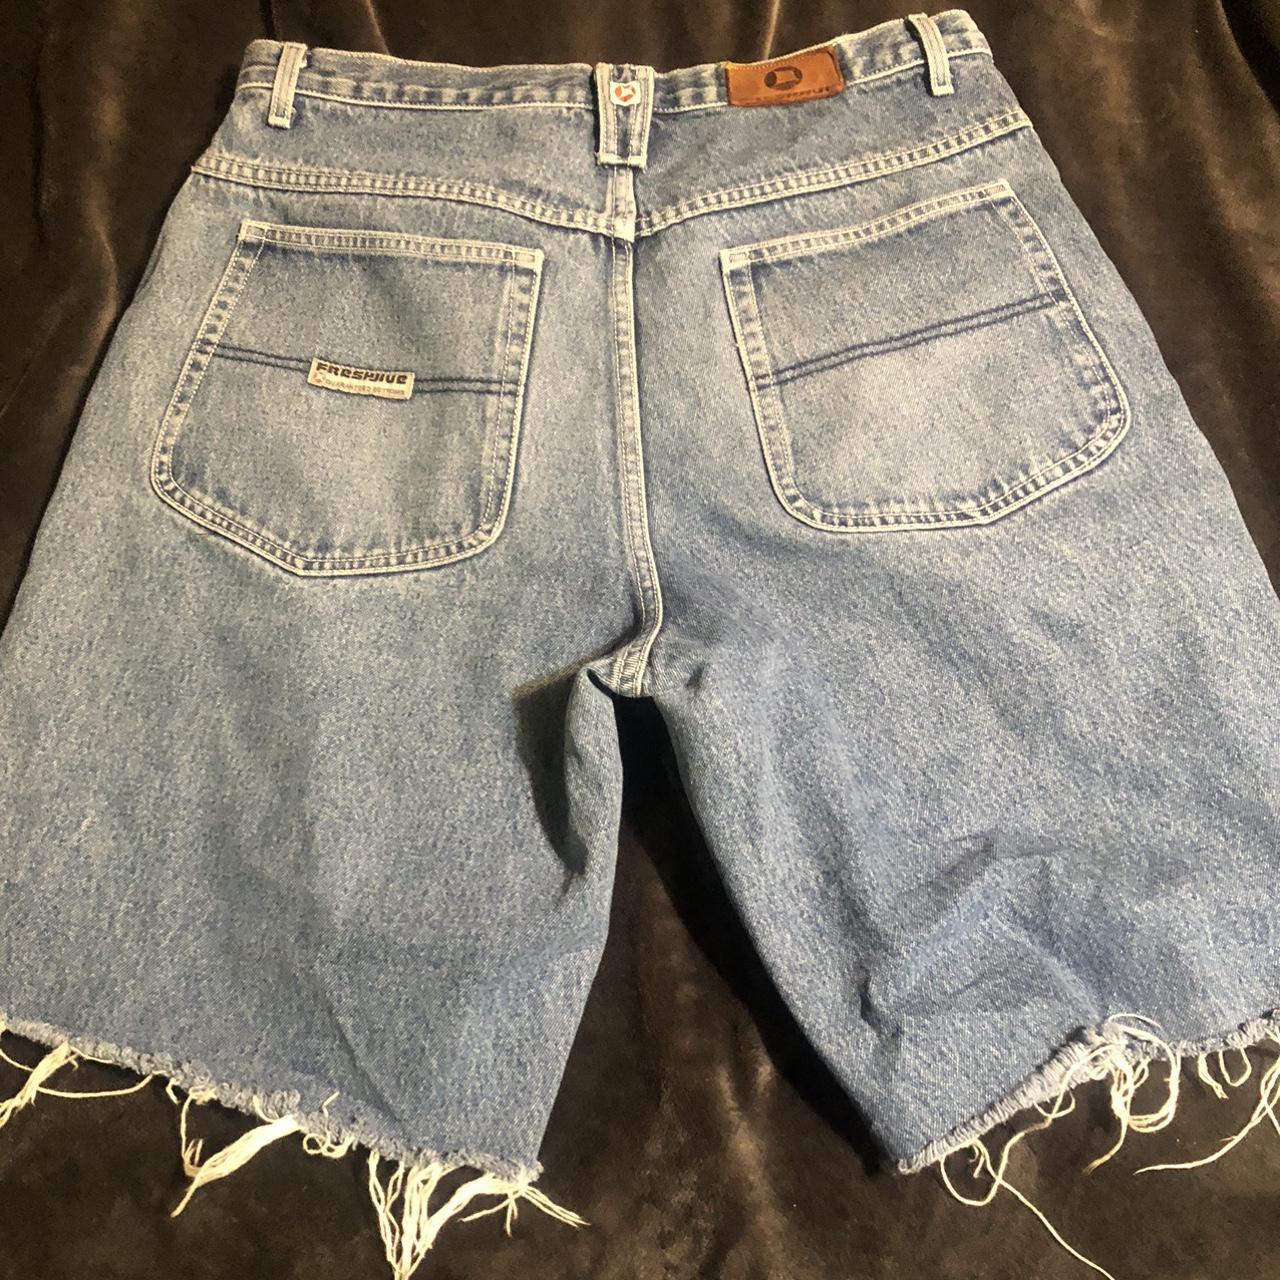 Jorts JNCO style w/ Insane embroidery Excellent... - Depop